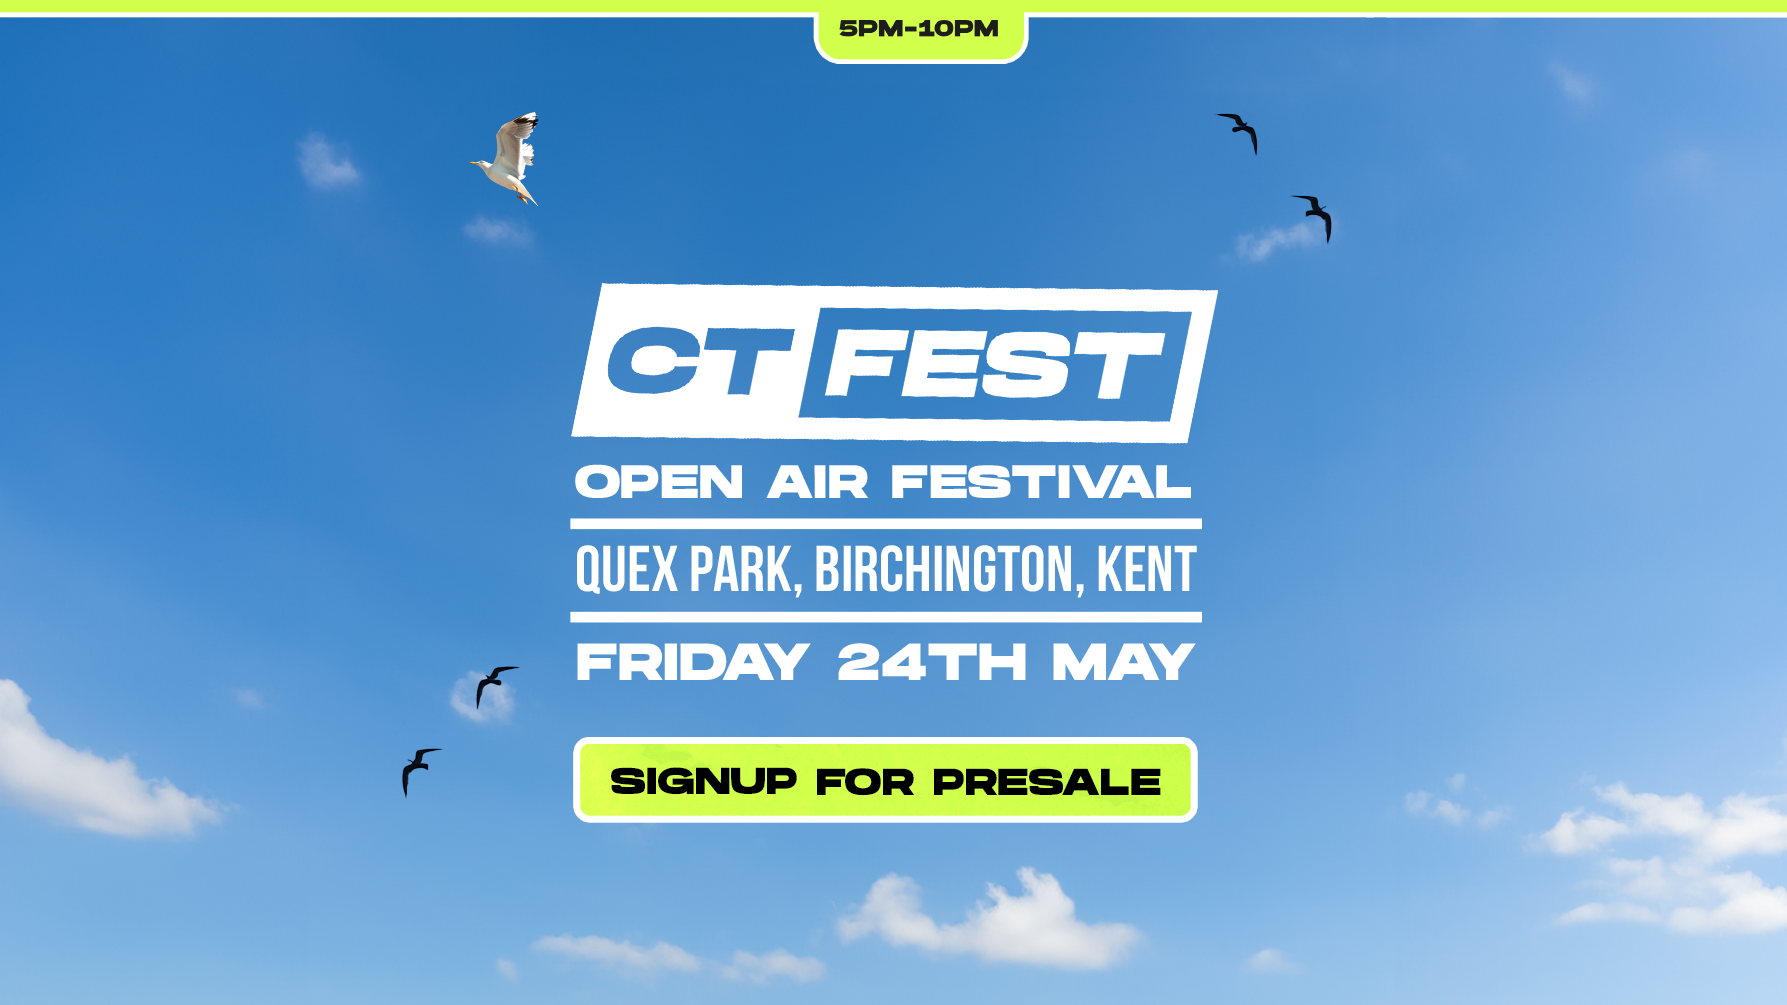 CT Fest ∙ OPEN AIR FESTIVAL SIGNUP *only 65 signup spaces left*